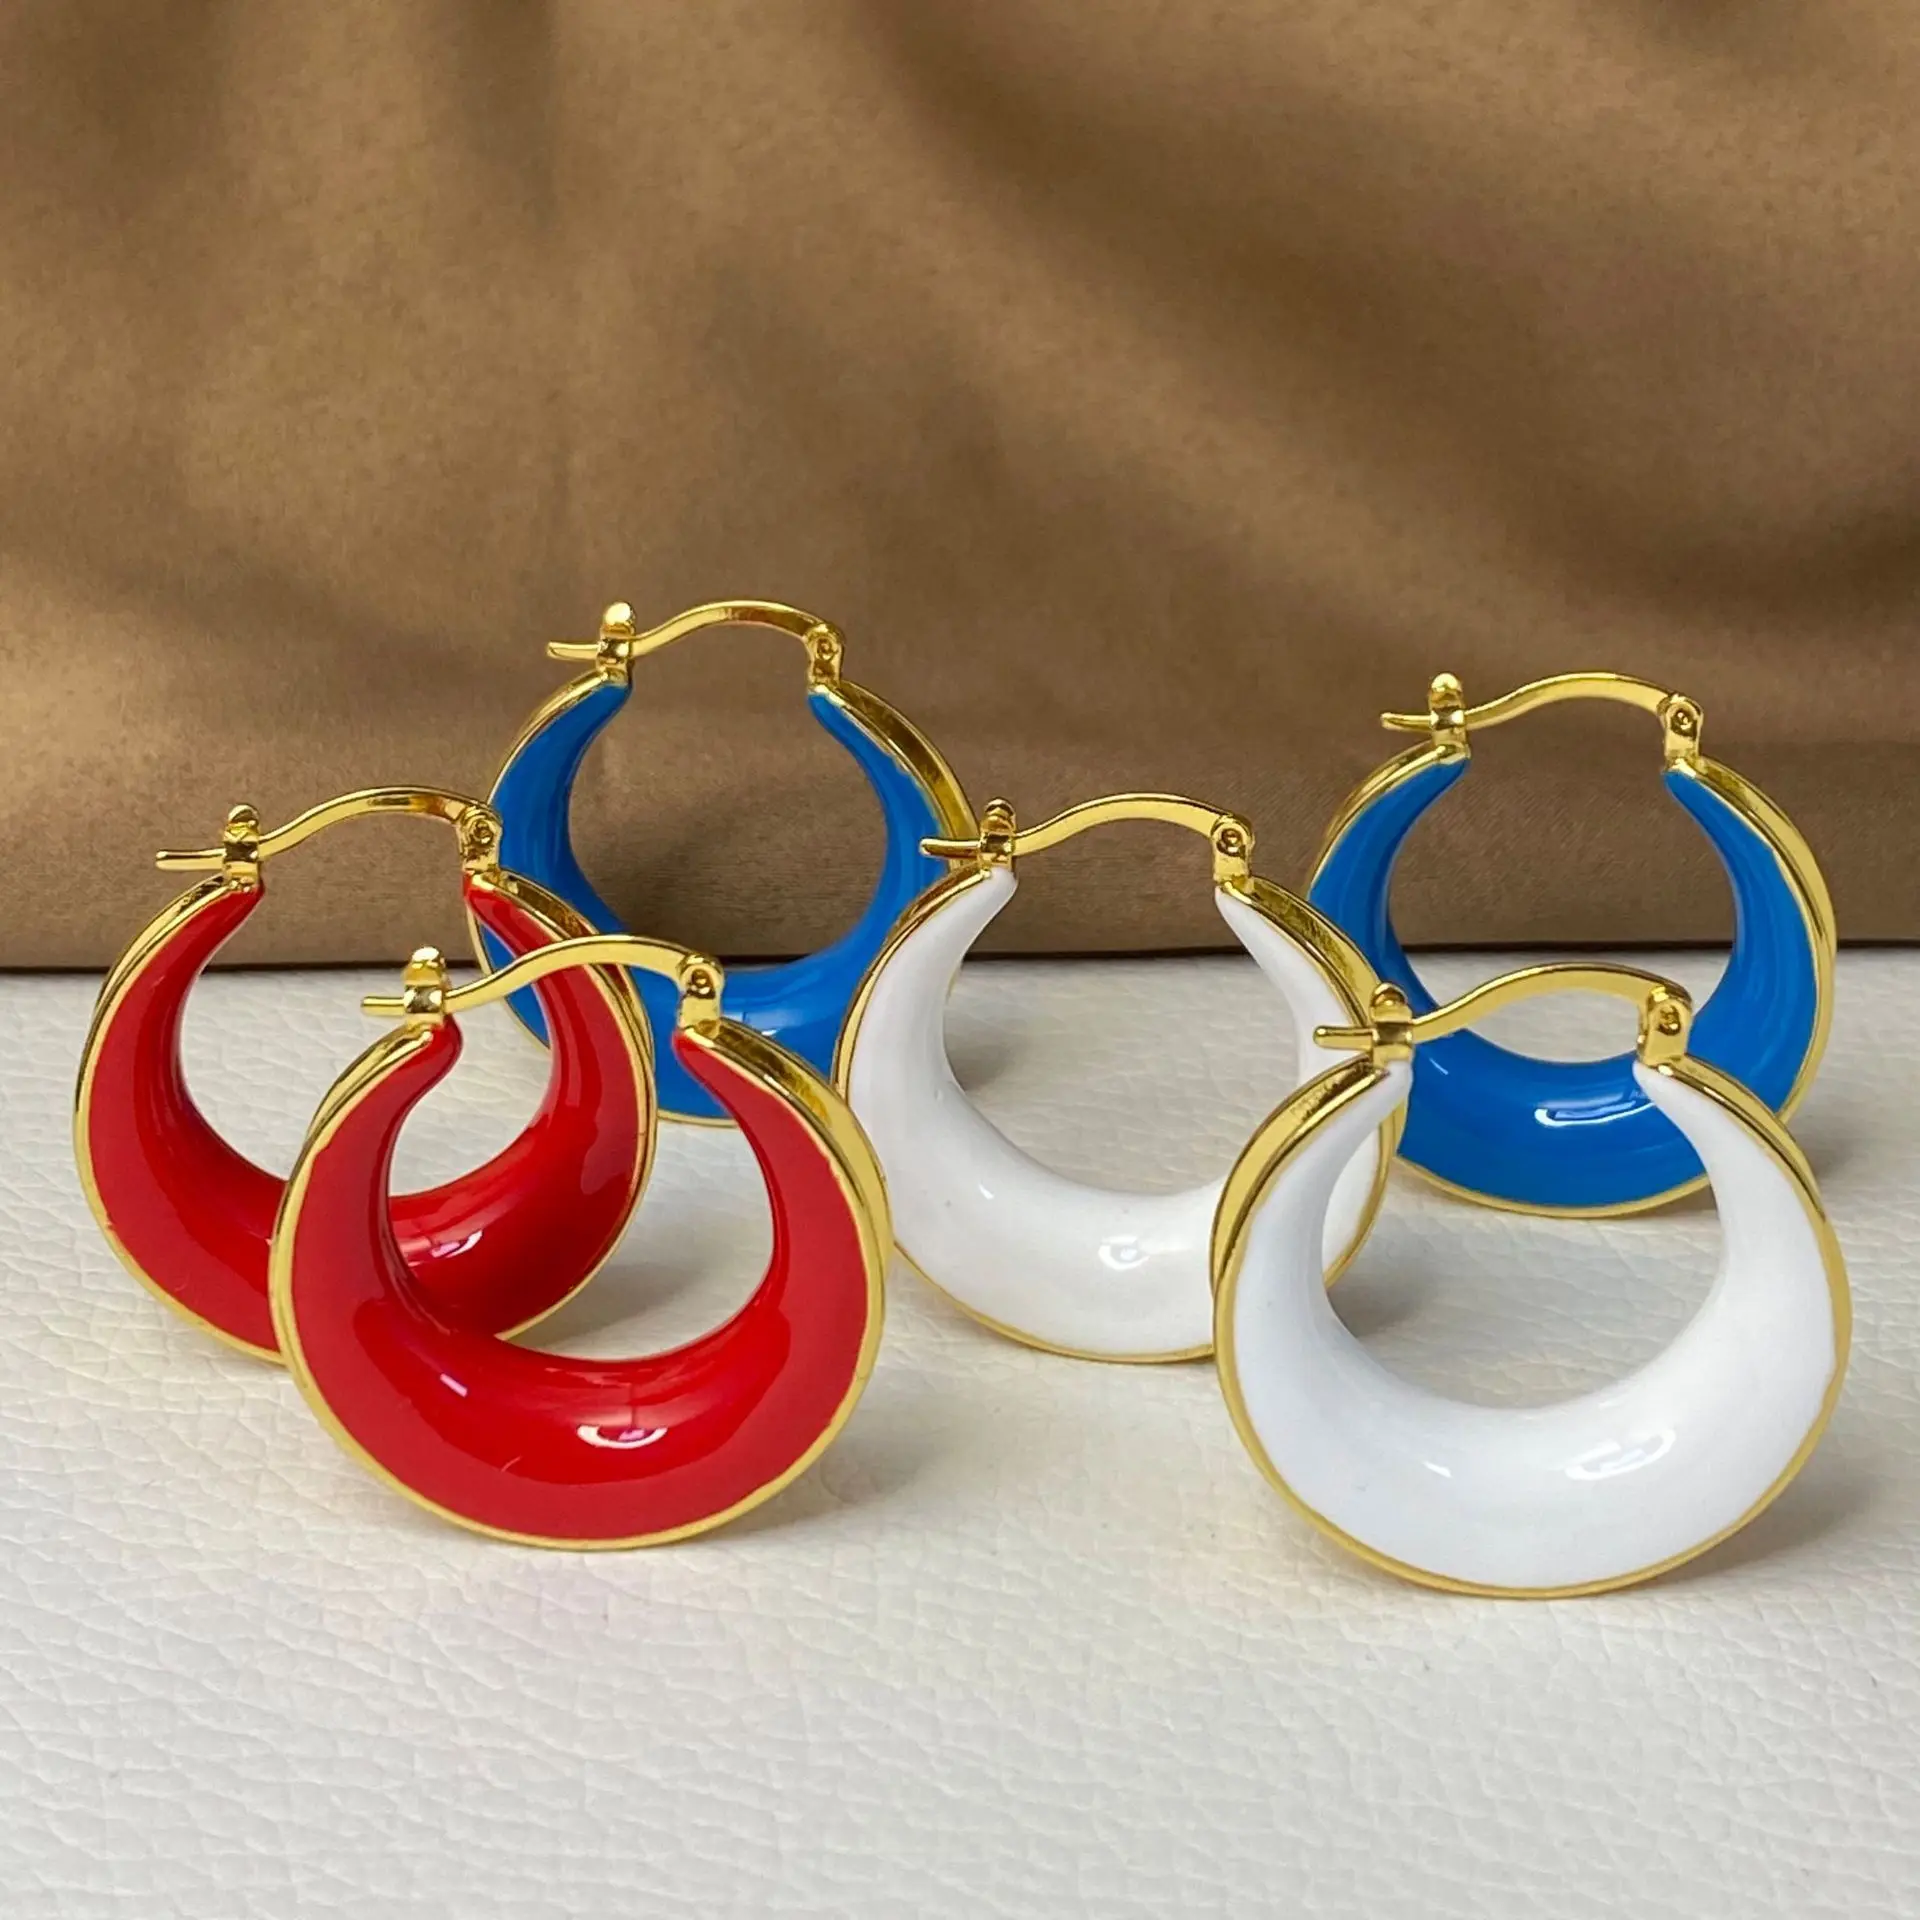 

Ins Fashion 18K Gold Plated Enamel Circle Earrings Statement Colorful Oil Drip Hoop Earrings For Women